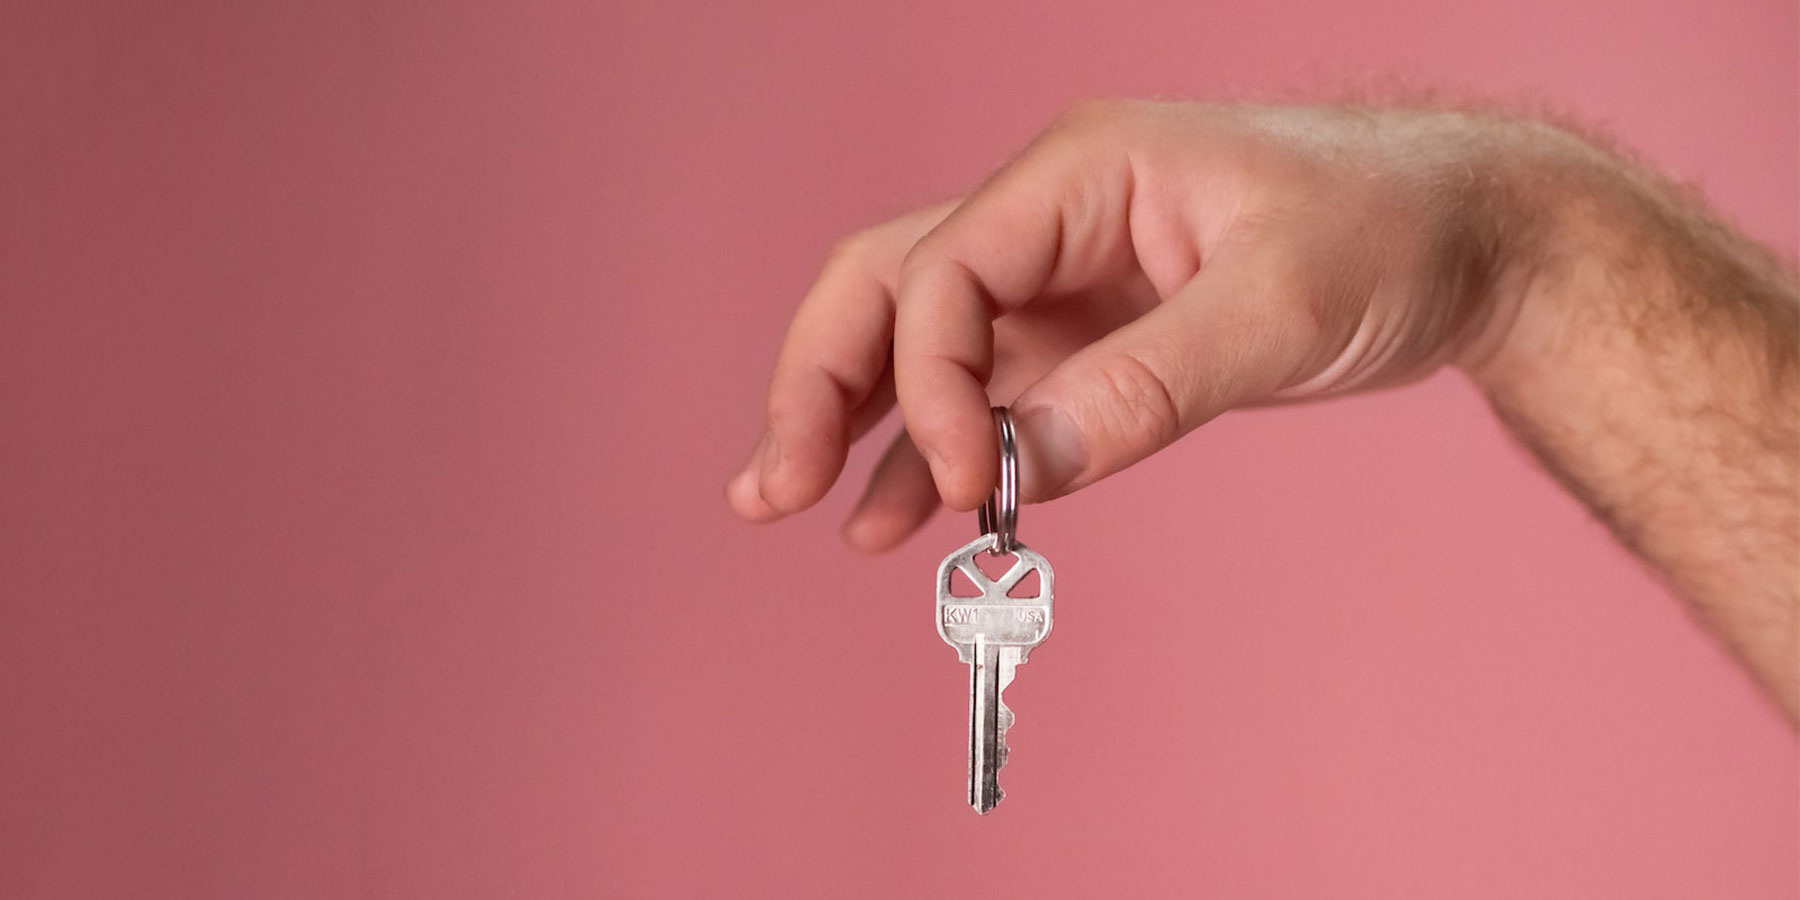 Hand holding a key over a pink background